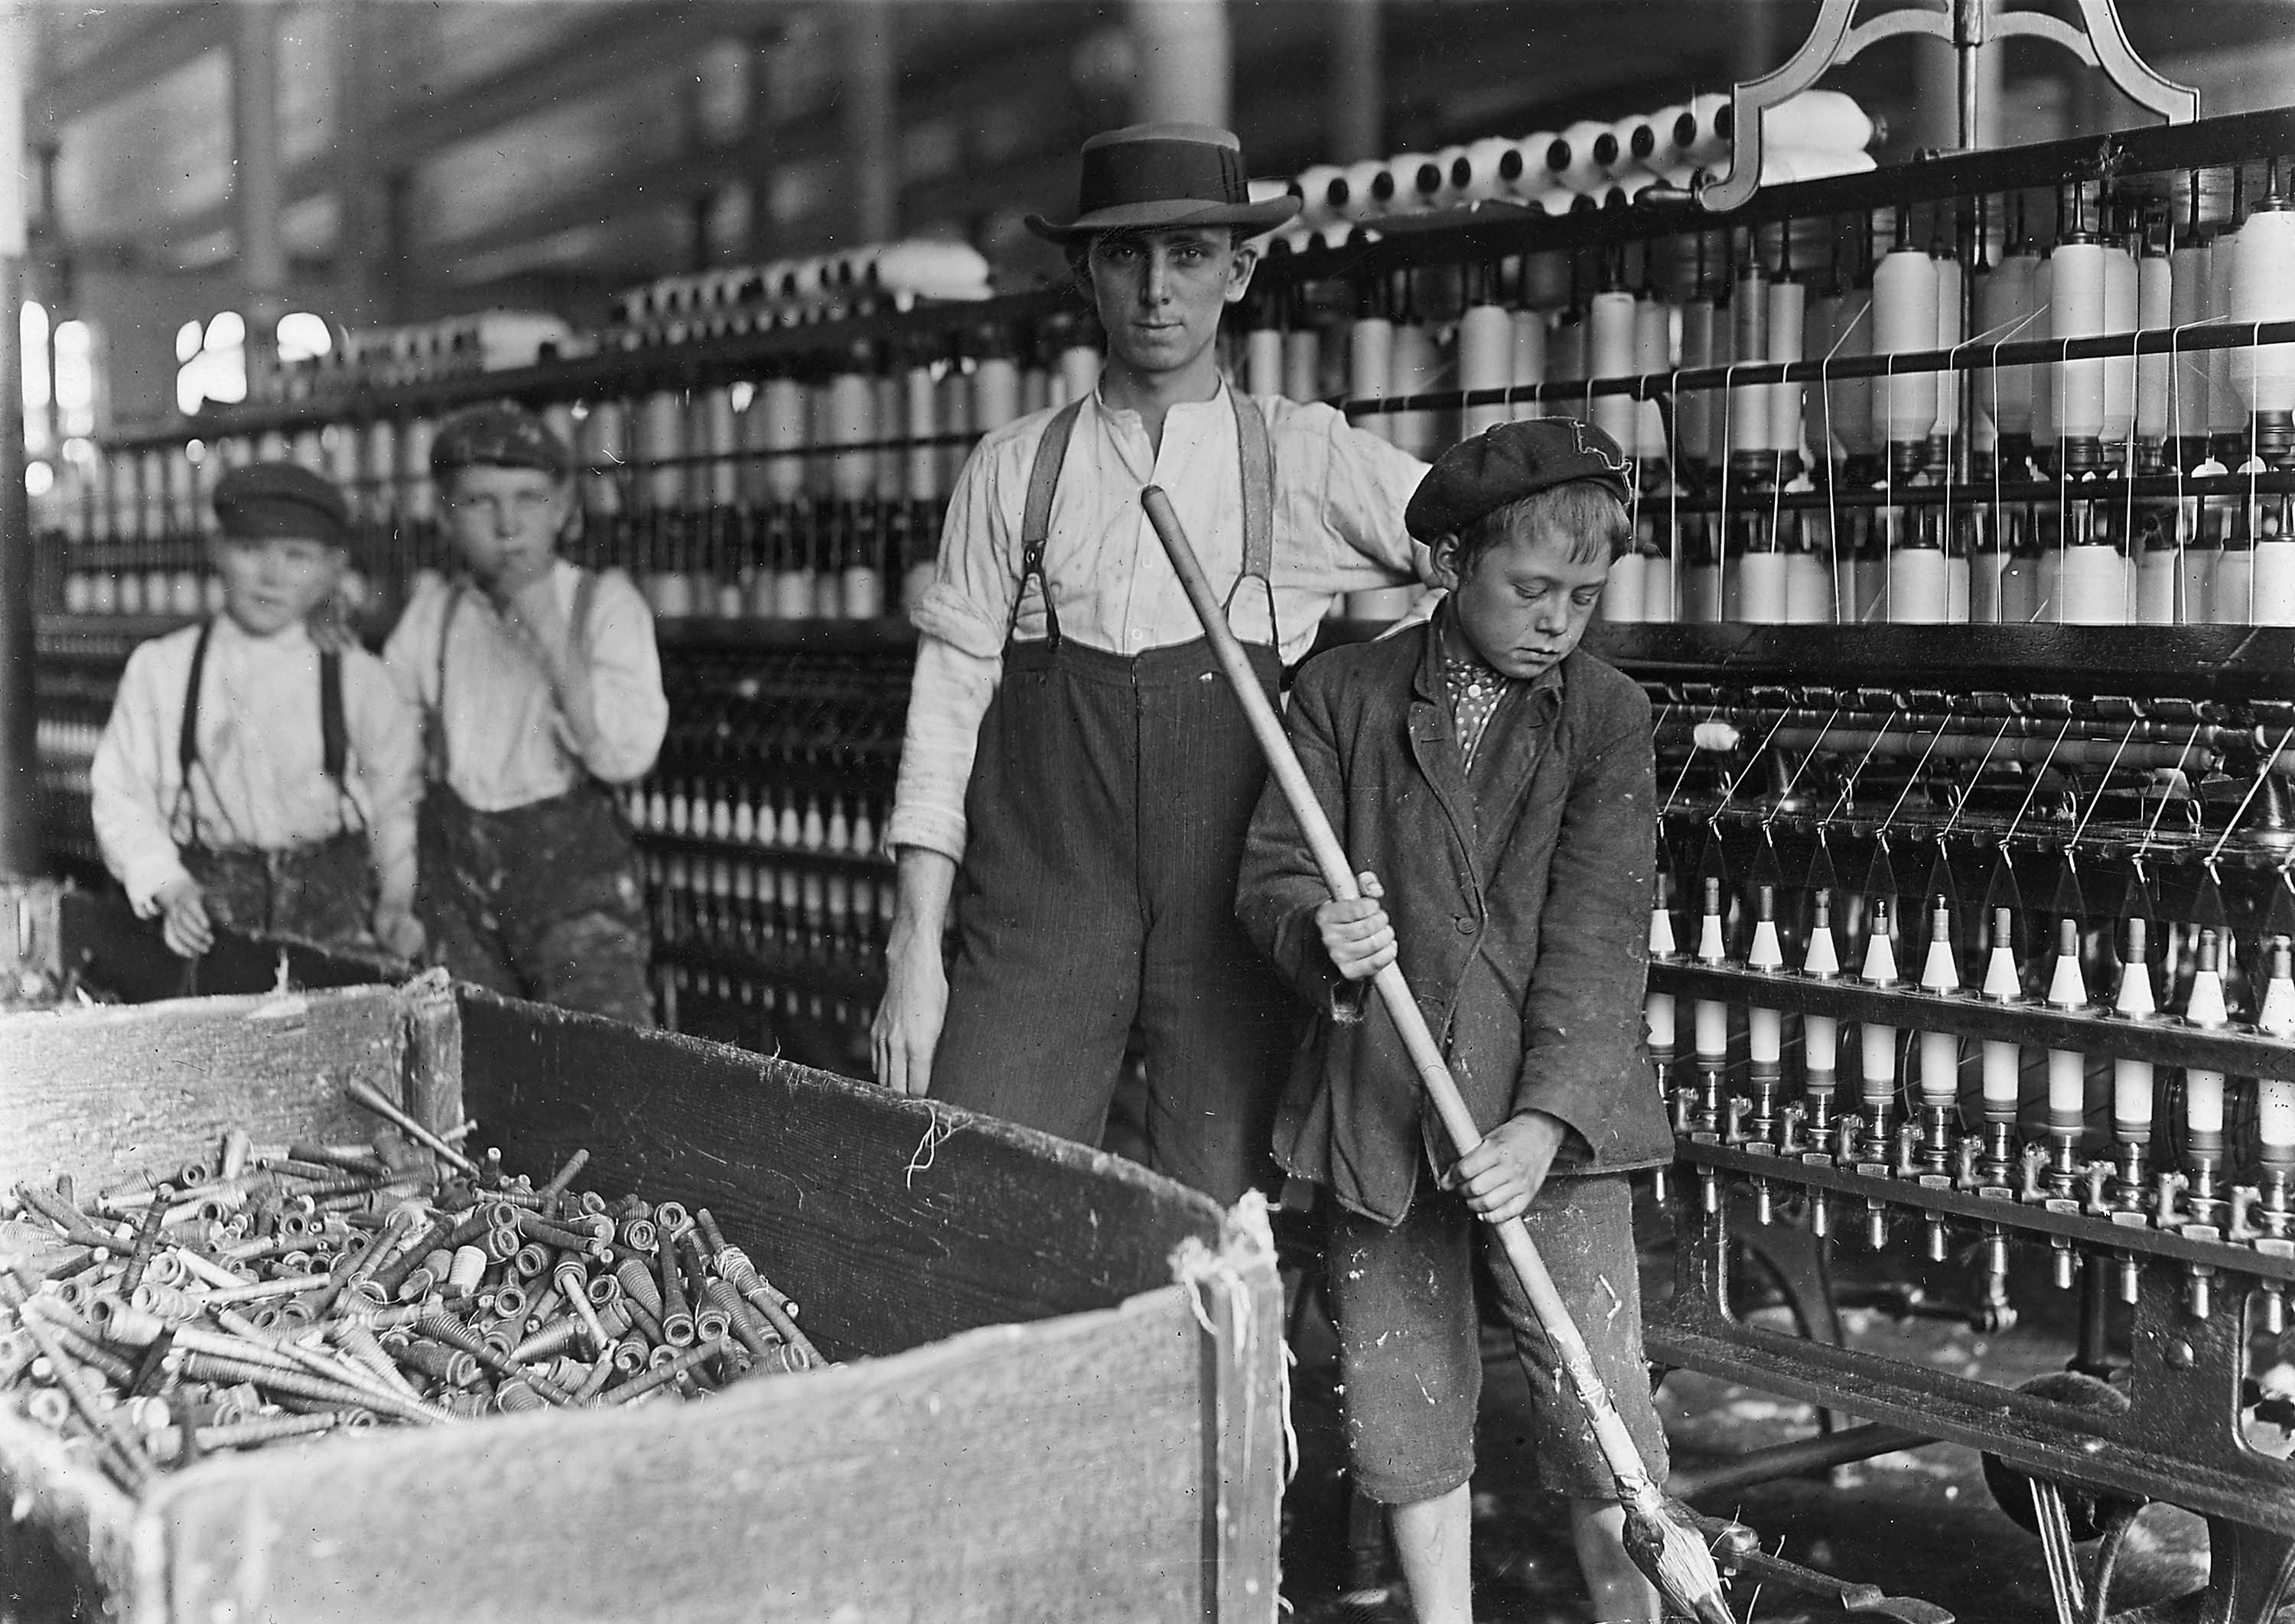 http://www.archives.gov/press/press-kits/picturing-the-century-photos/images/sweeper-and-doffer-in-cotton-mill.jpg